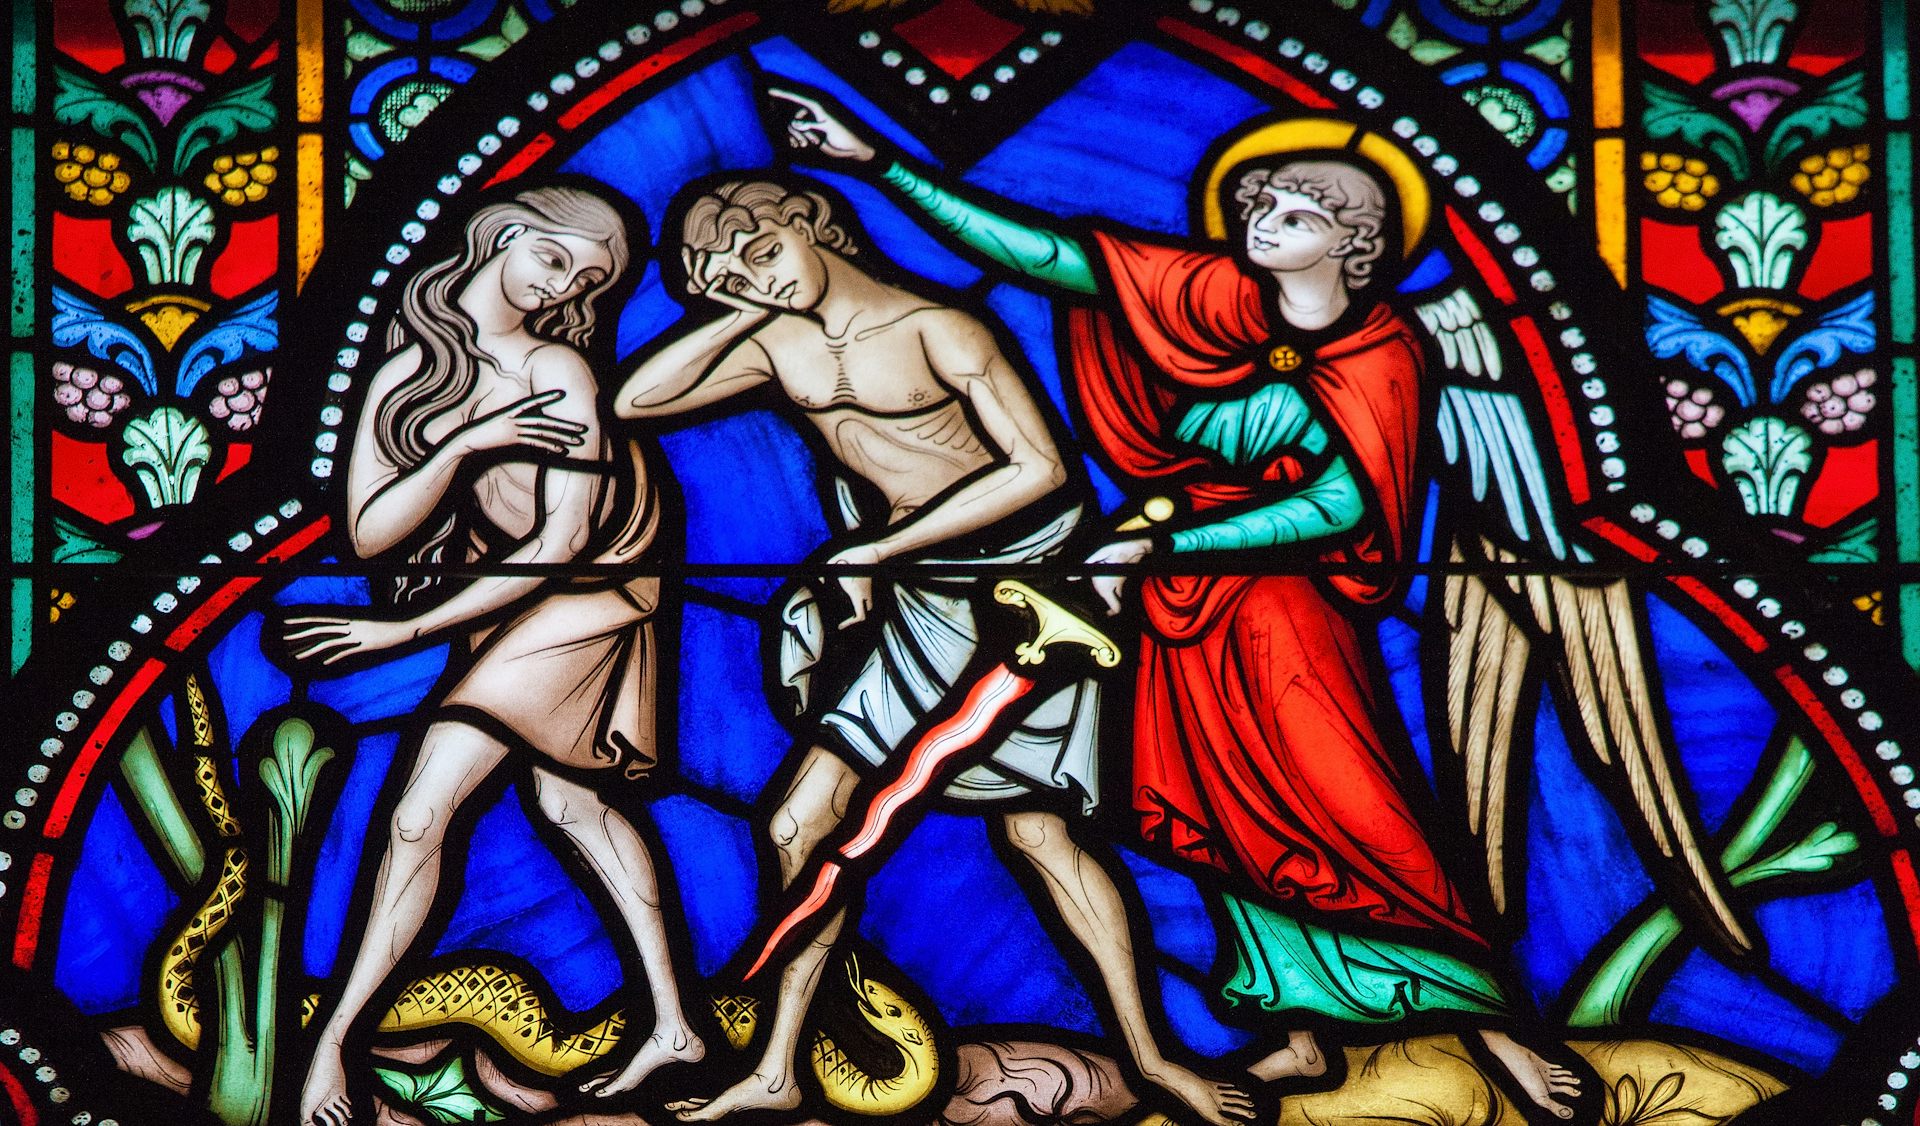 A stained glass window depicting Adam and Eve.